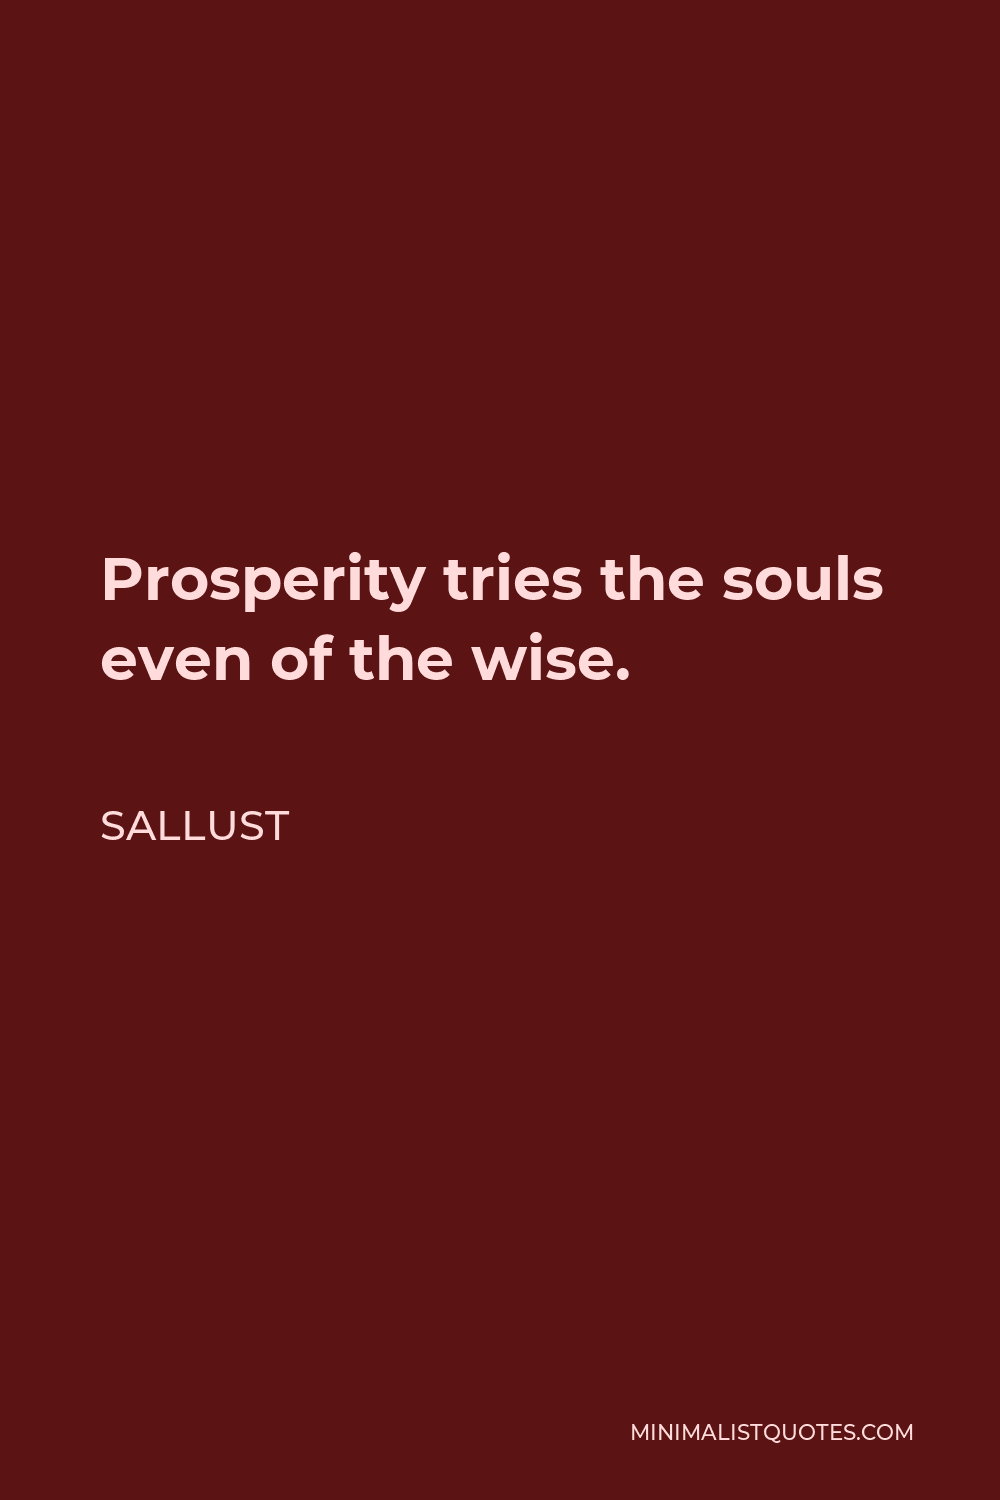 Sallust Quote - Prosperity tries the souls even of the wise.